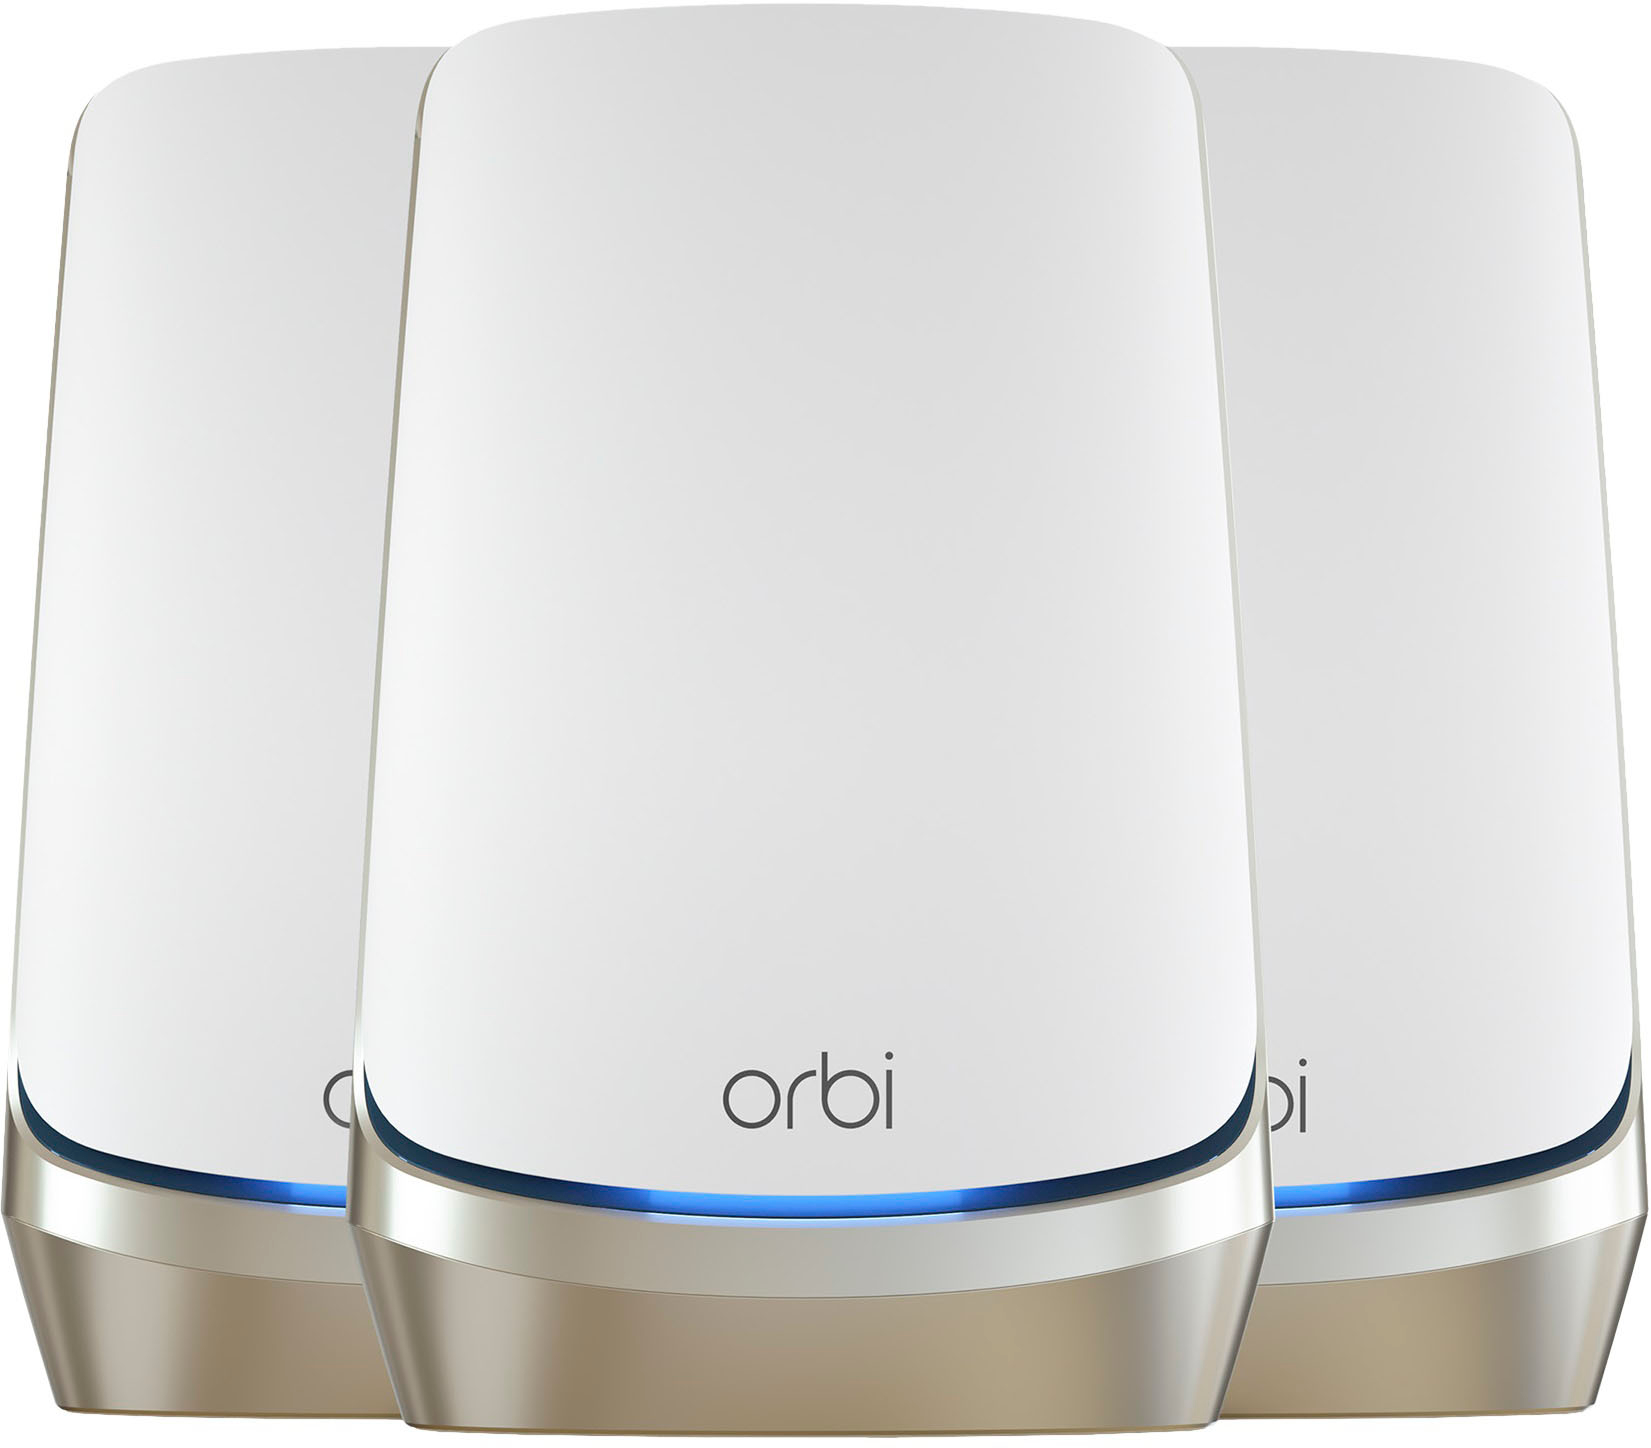 Netgear Orbi AXE11000 review: A mighty mesh router that's more